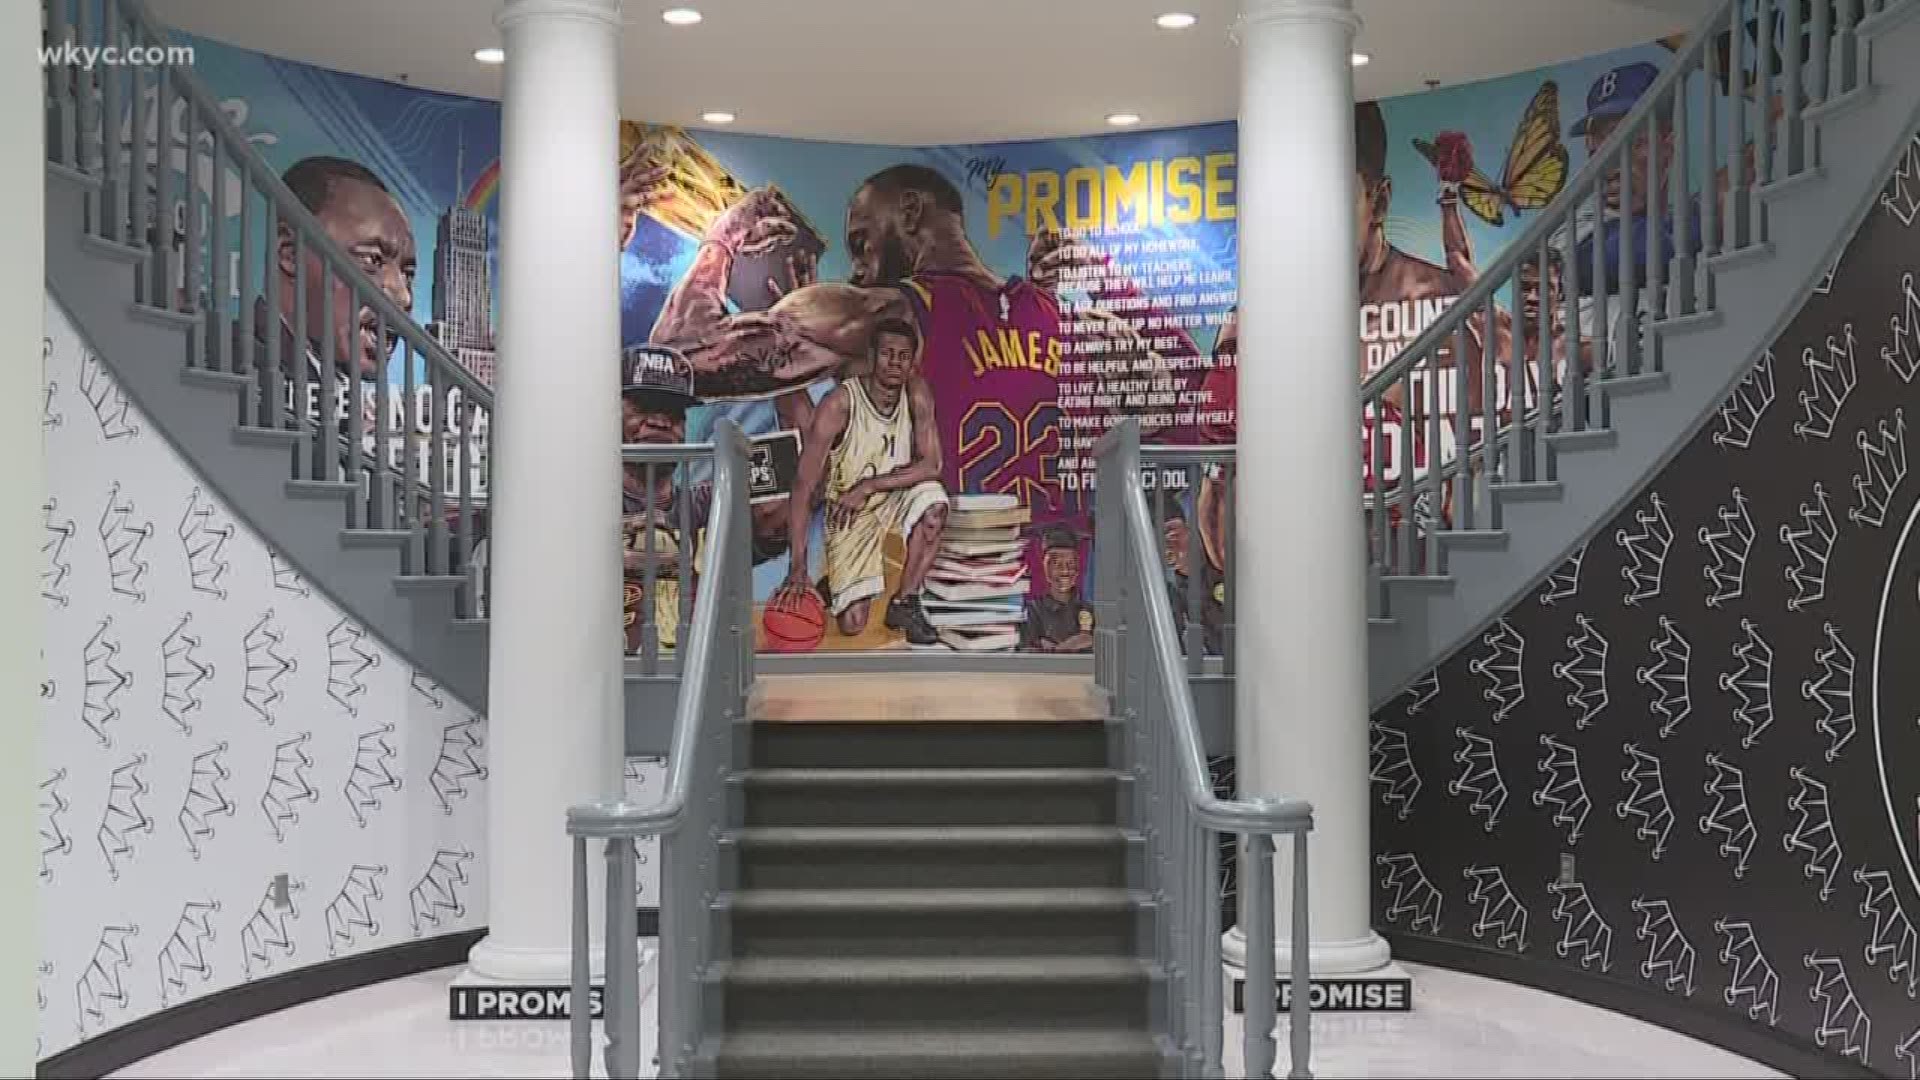 July 30, 2018: NBA star and Akron native LeBron James is opening the I PROMISE school in his hometown.